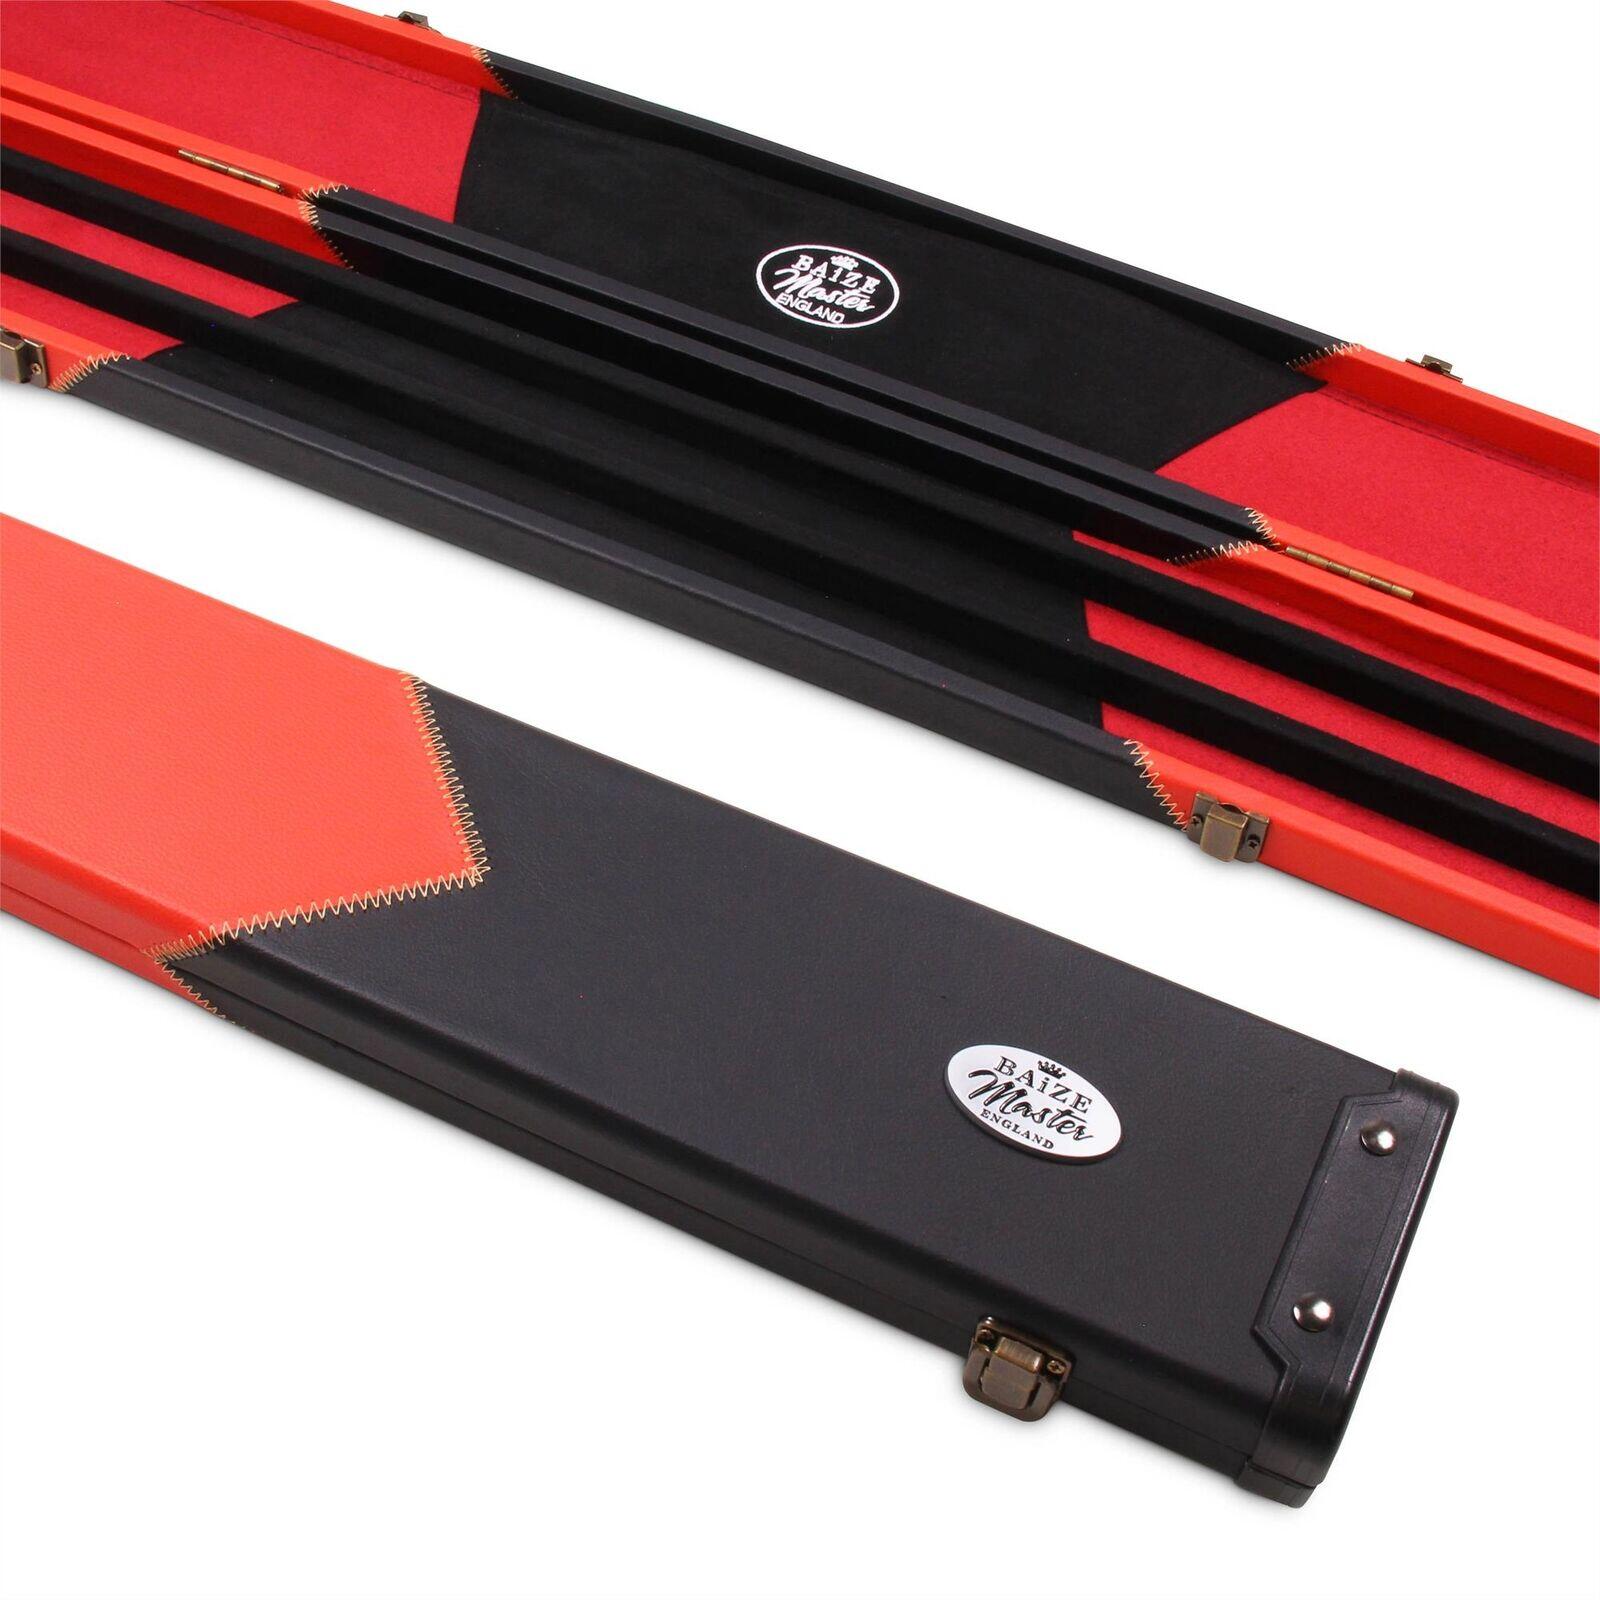 FUNKY CHALK Baize Master 1 Piece WIDE RED ARROW Snooker Pool Cue Case - Holds 3 Cues